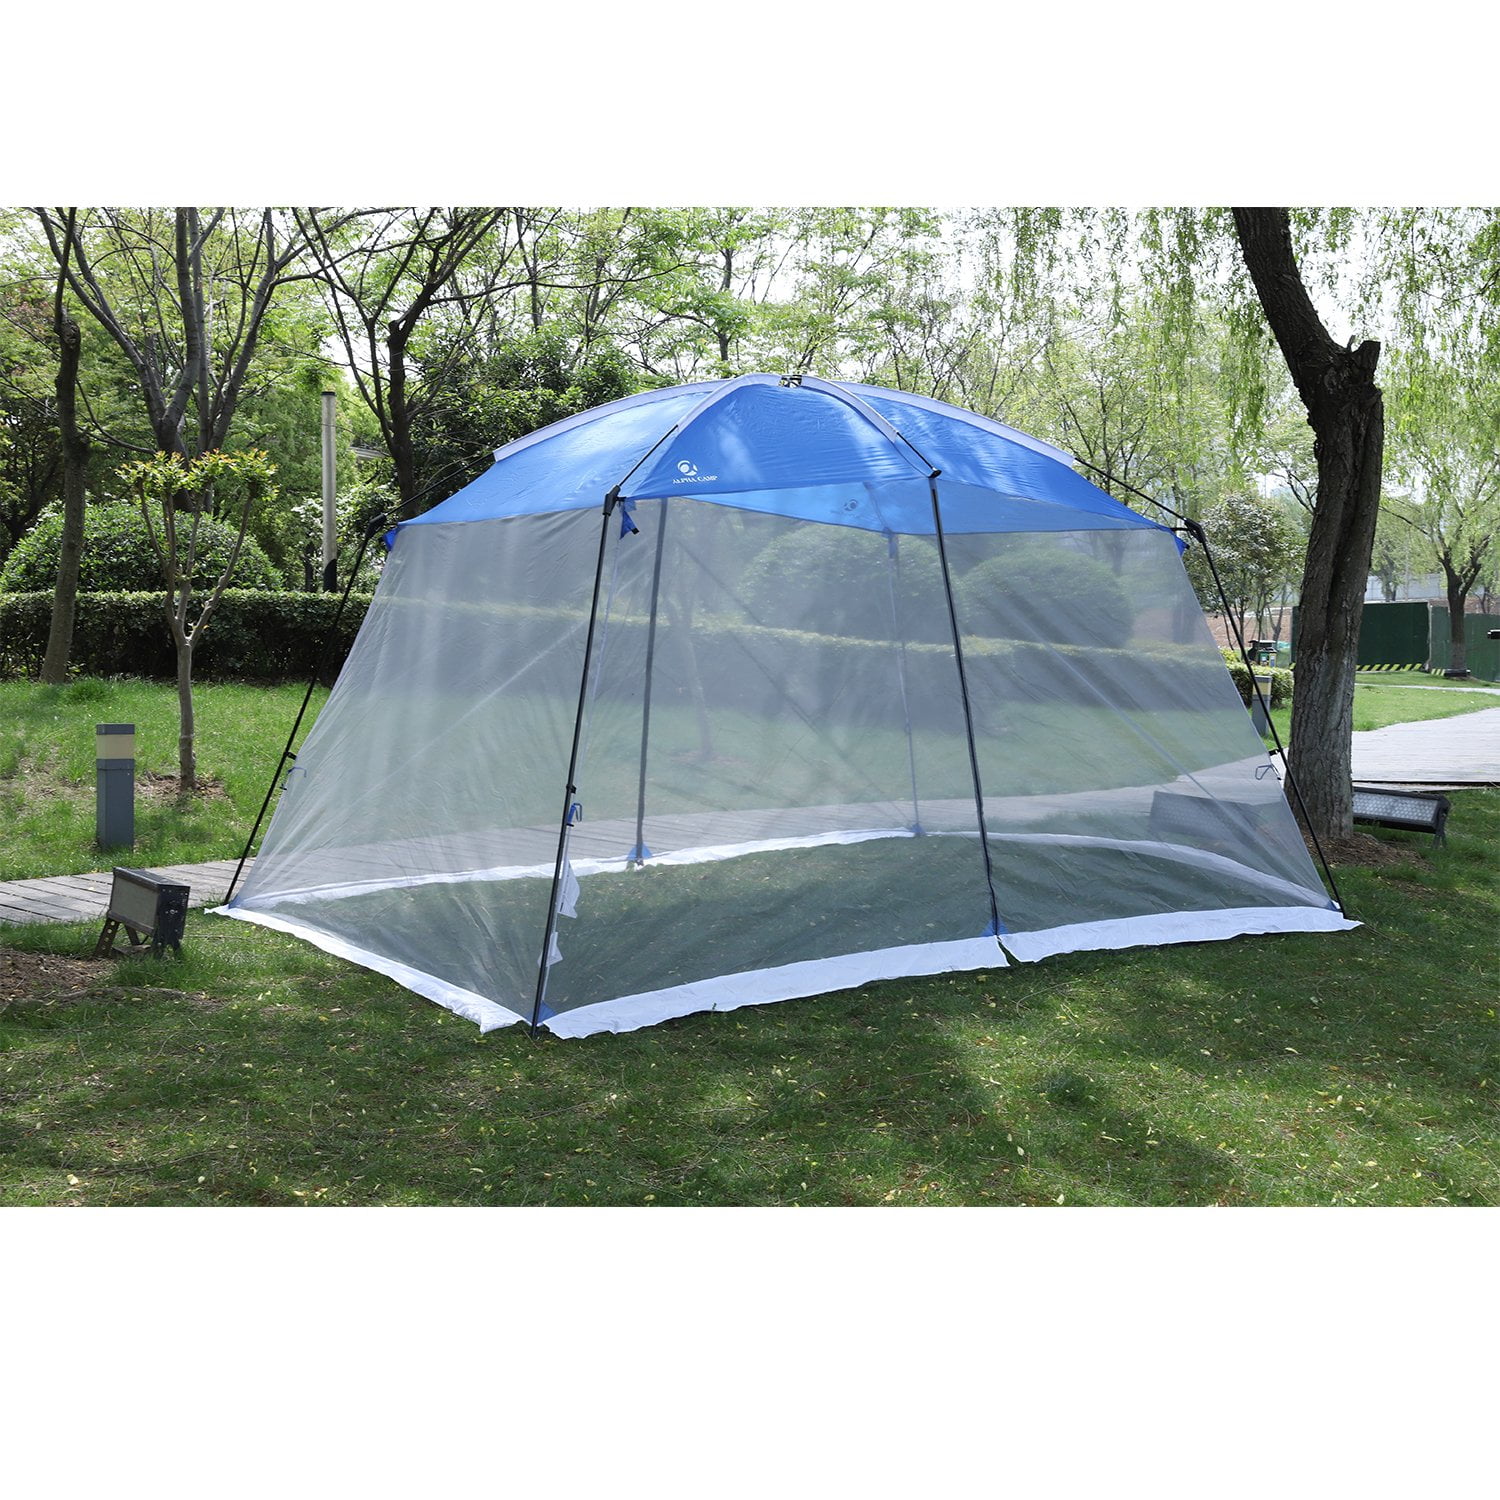 Large Camp Tent Screen Room Outdoor Canopy Shelter Mesh Panel Block Insect 13x9 